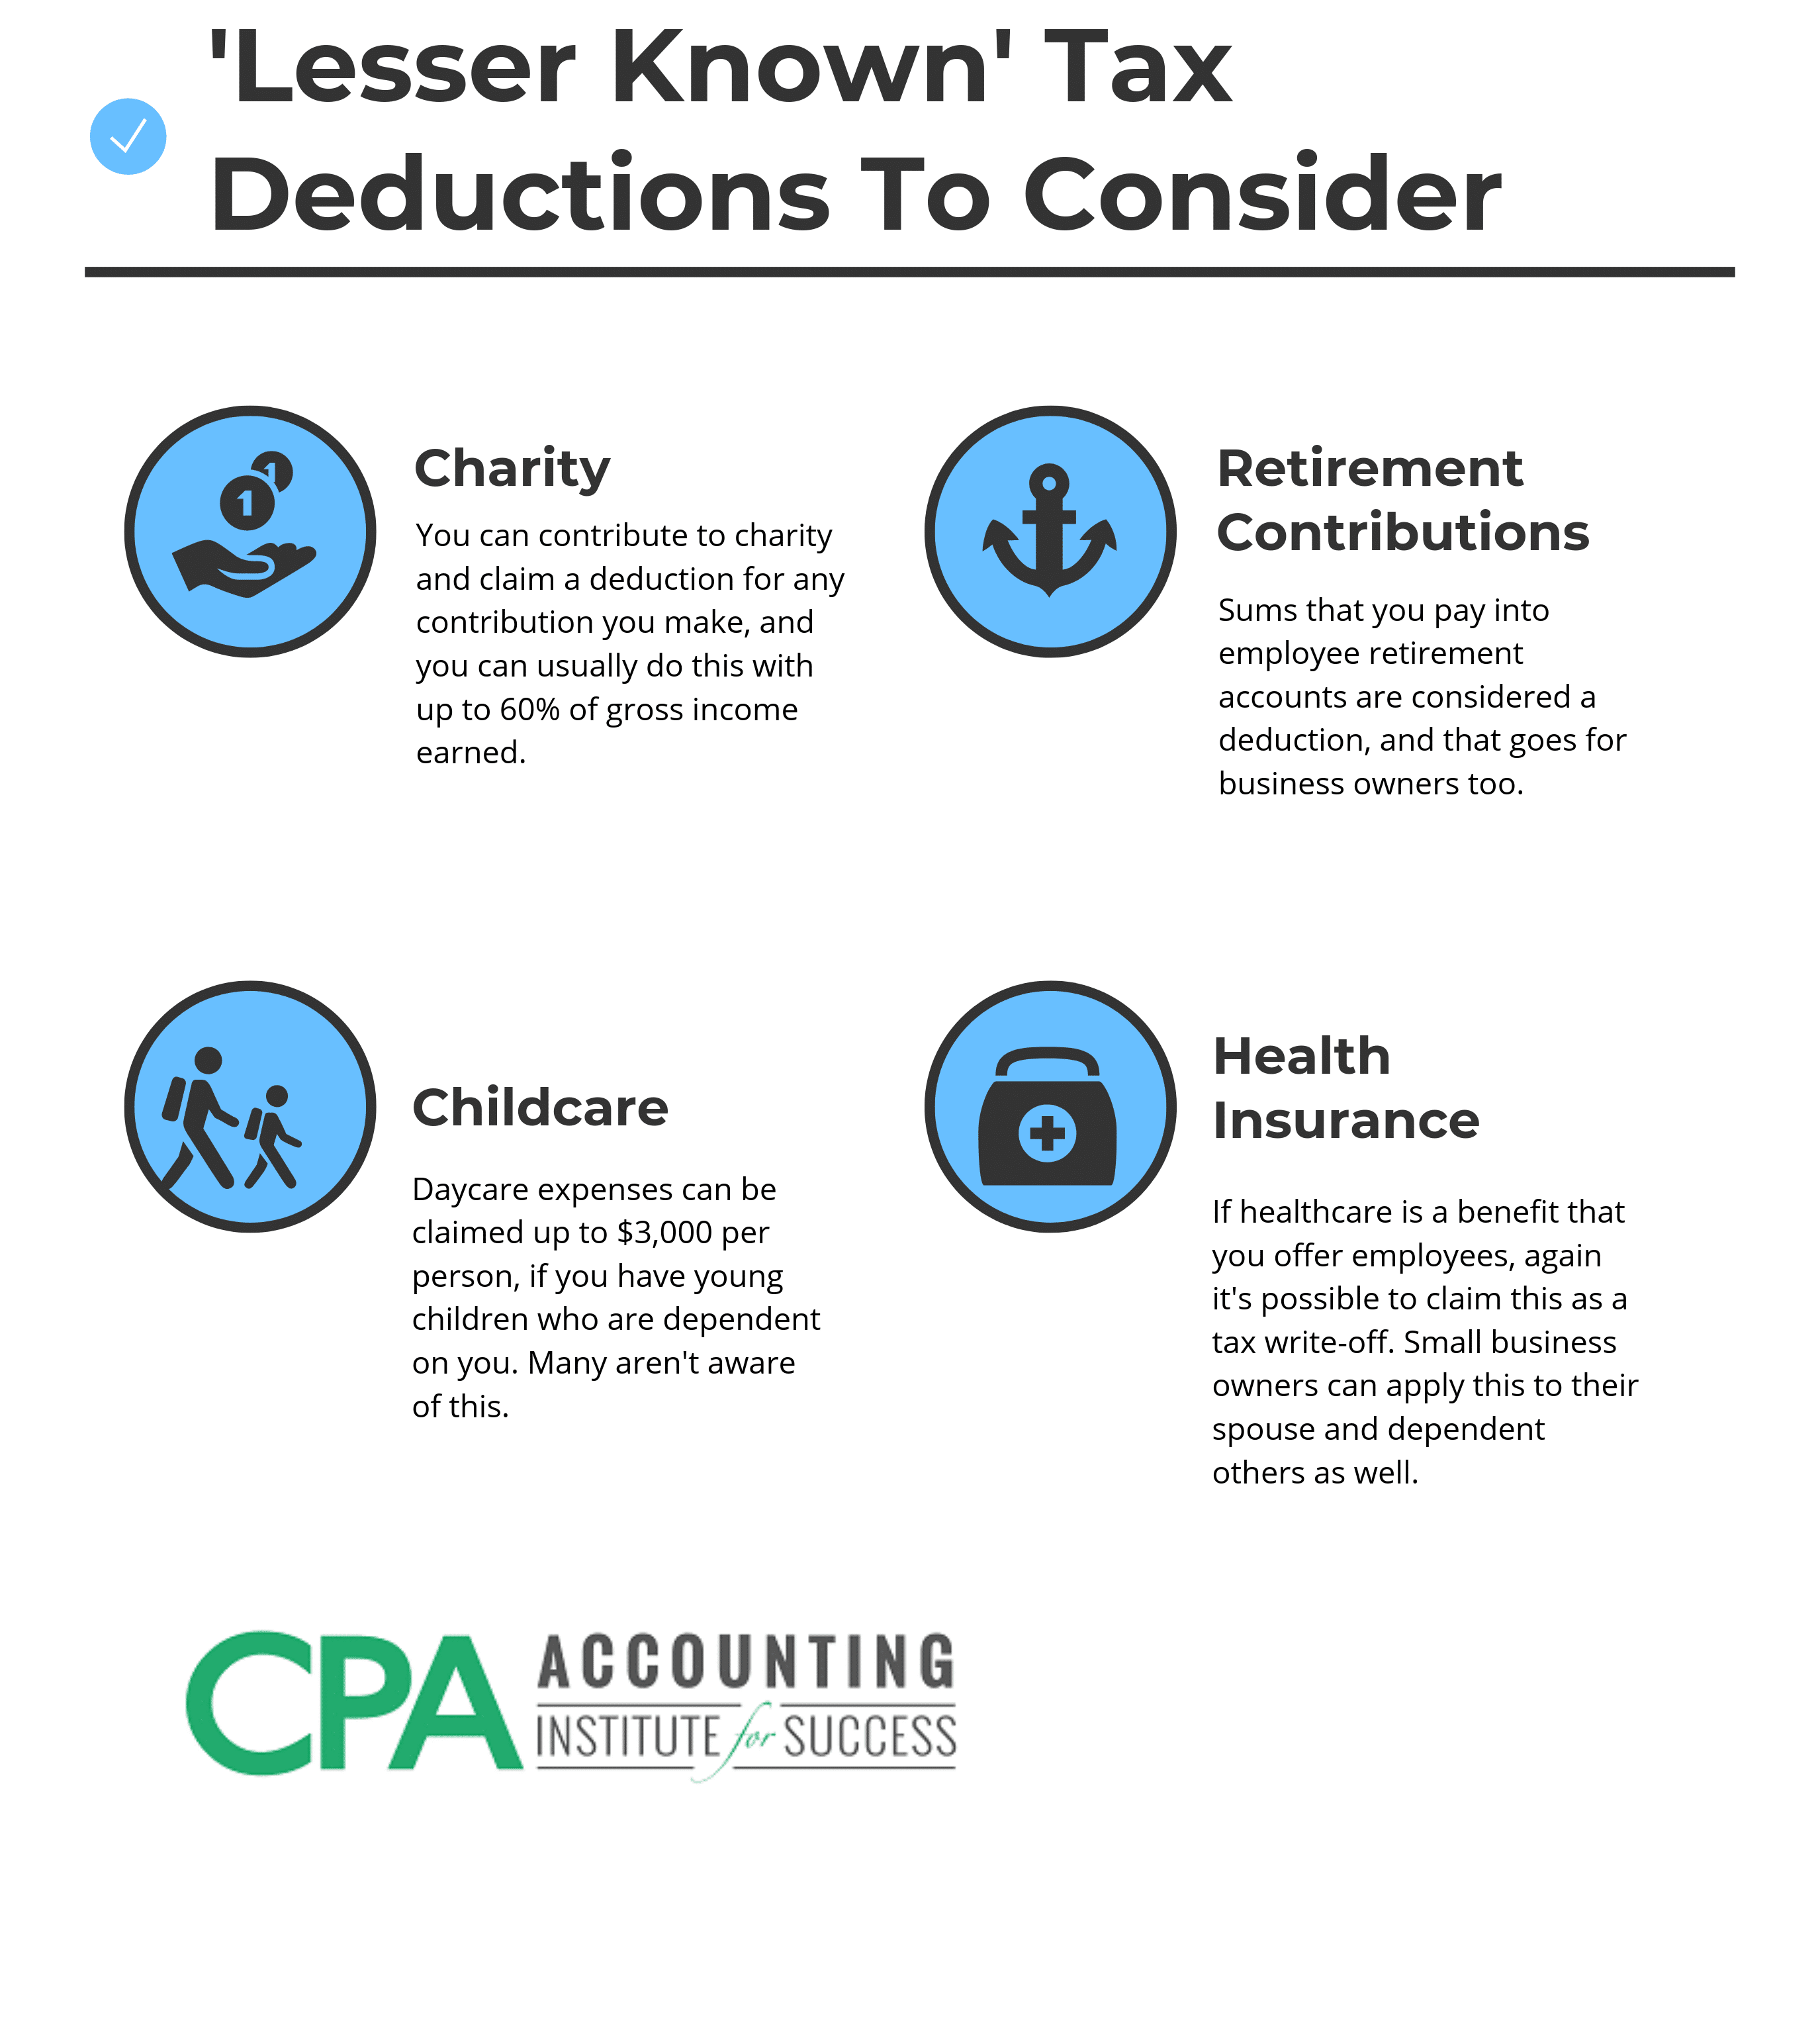 4 Best Lesser Known Business Tax Deductions - Ultimate Guide To Small Business Tax Deductions